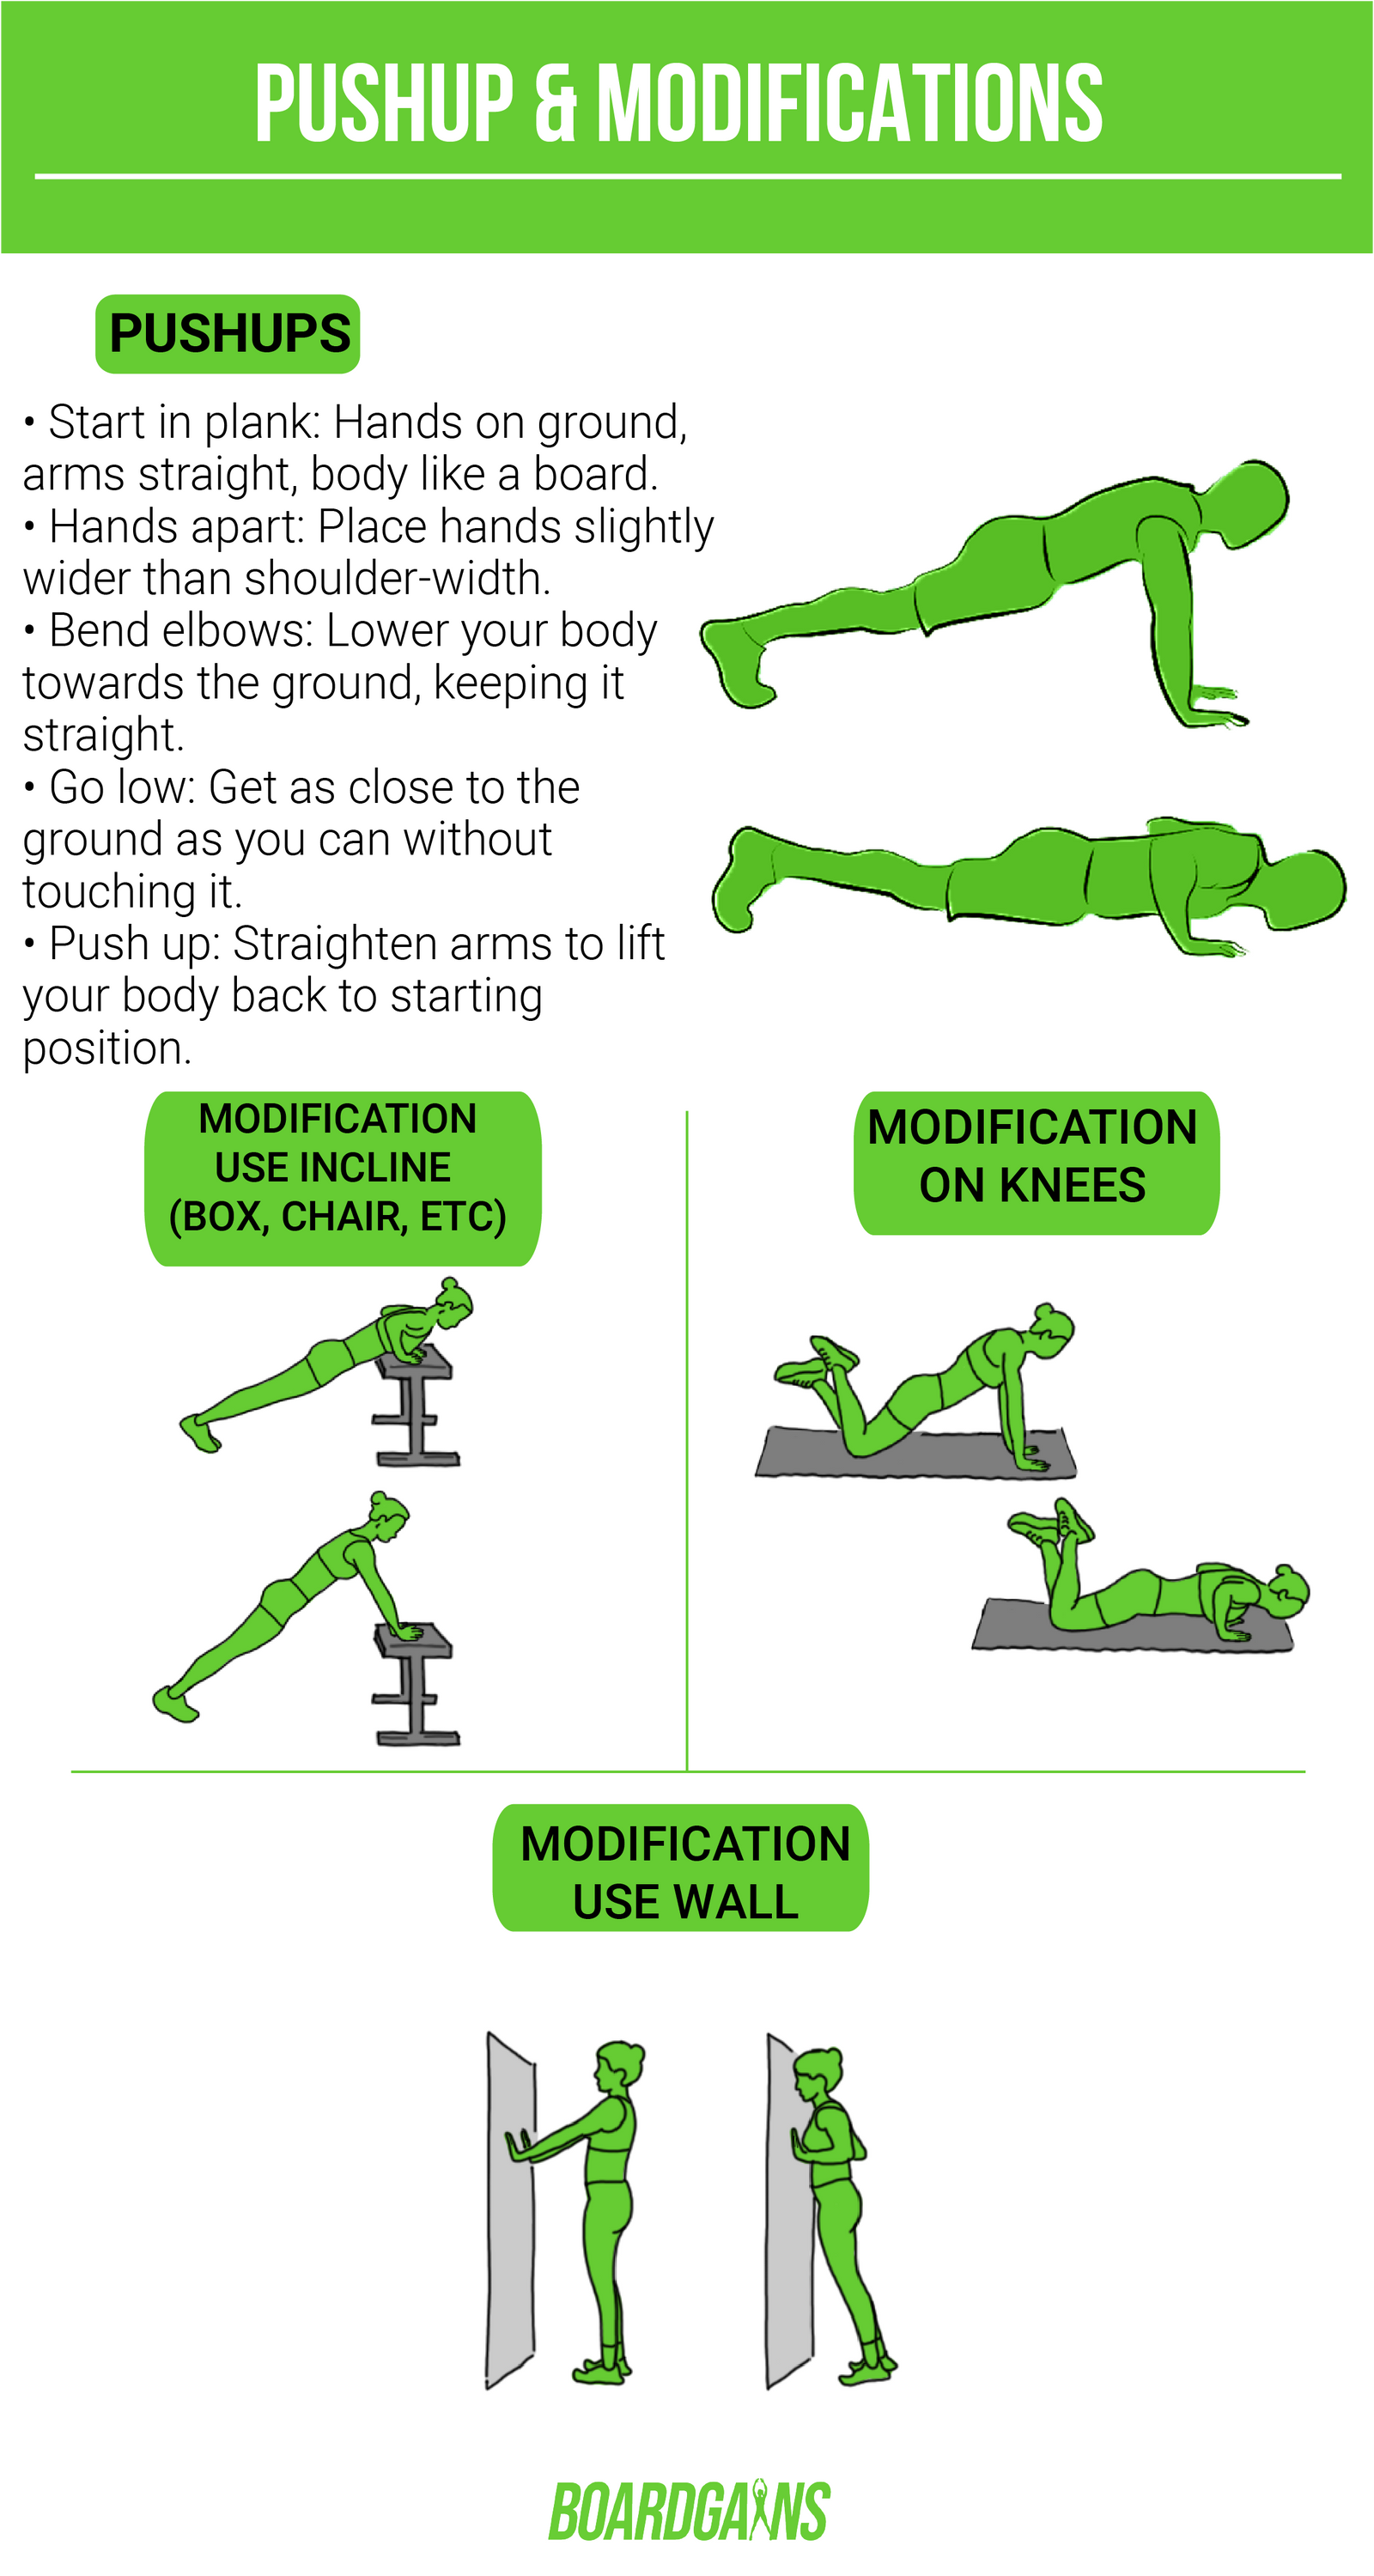 Instructions for correct push-ups for women